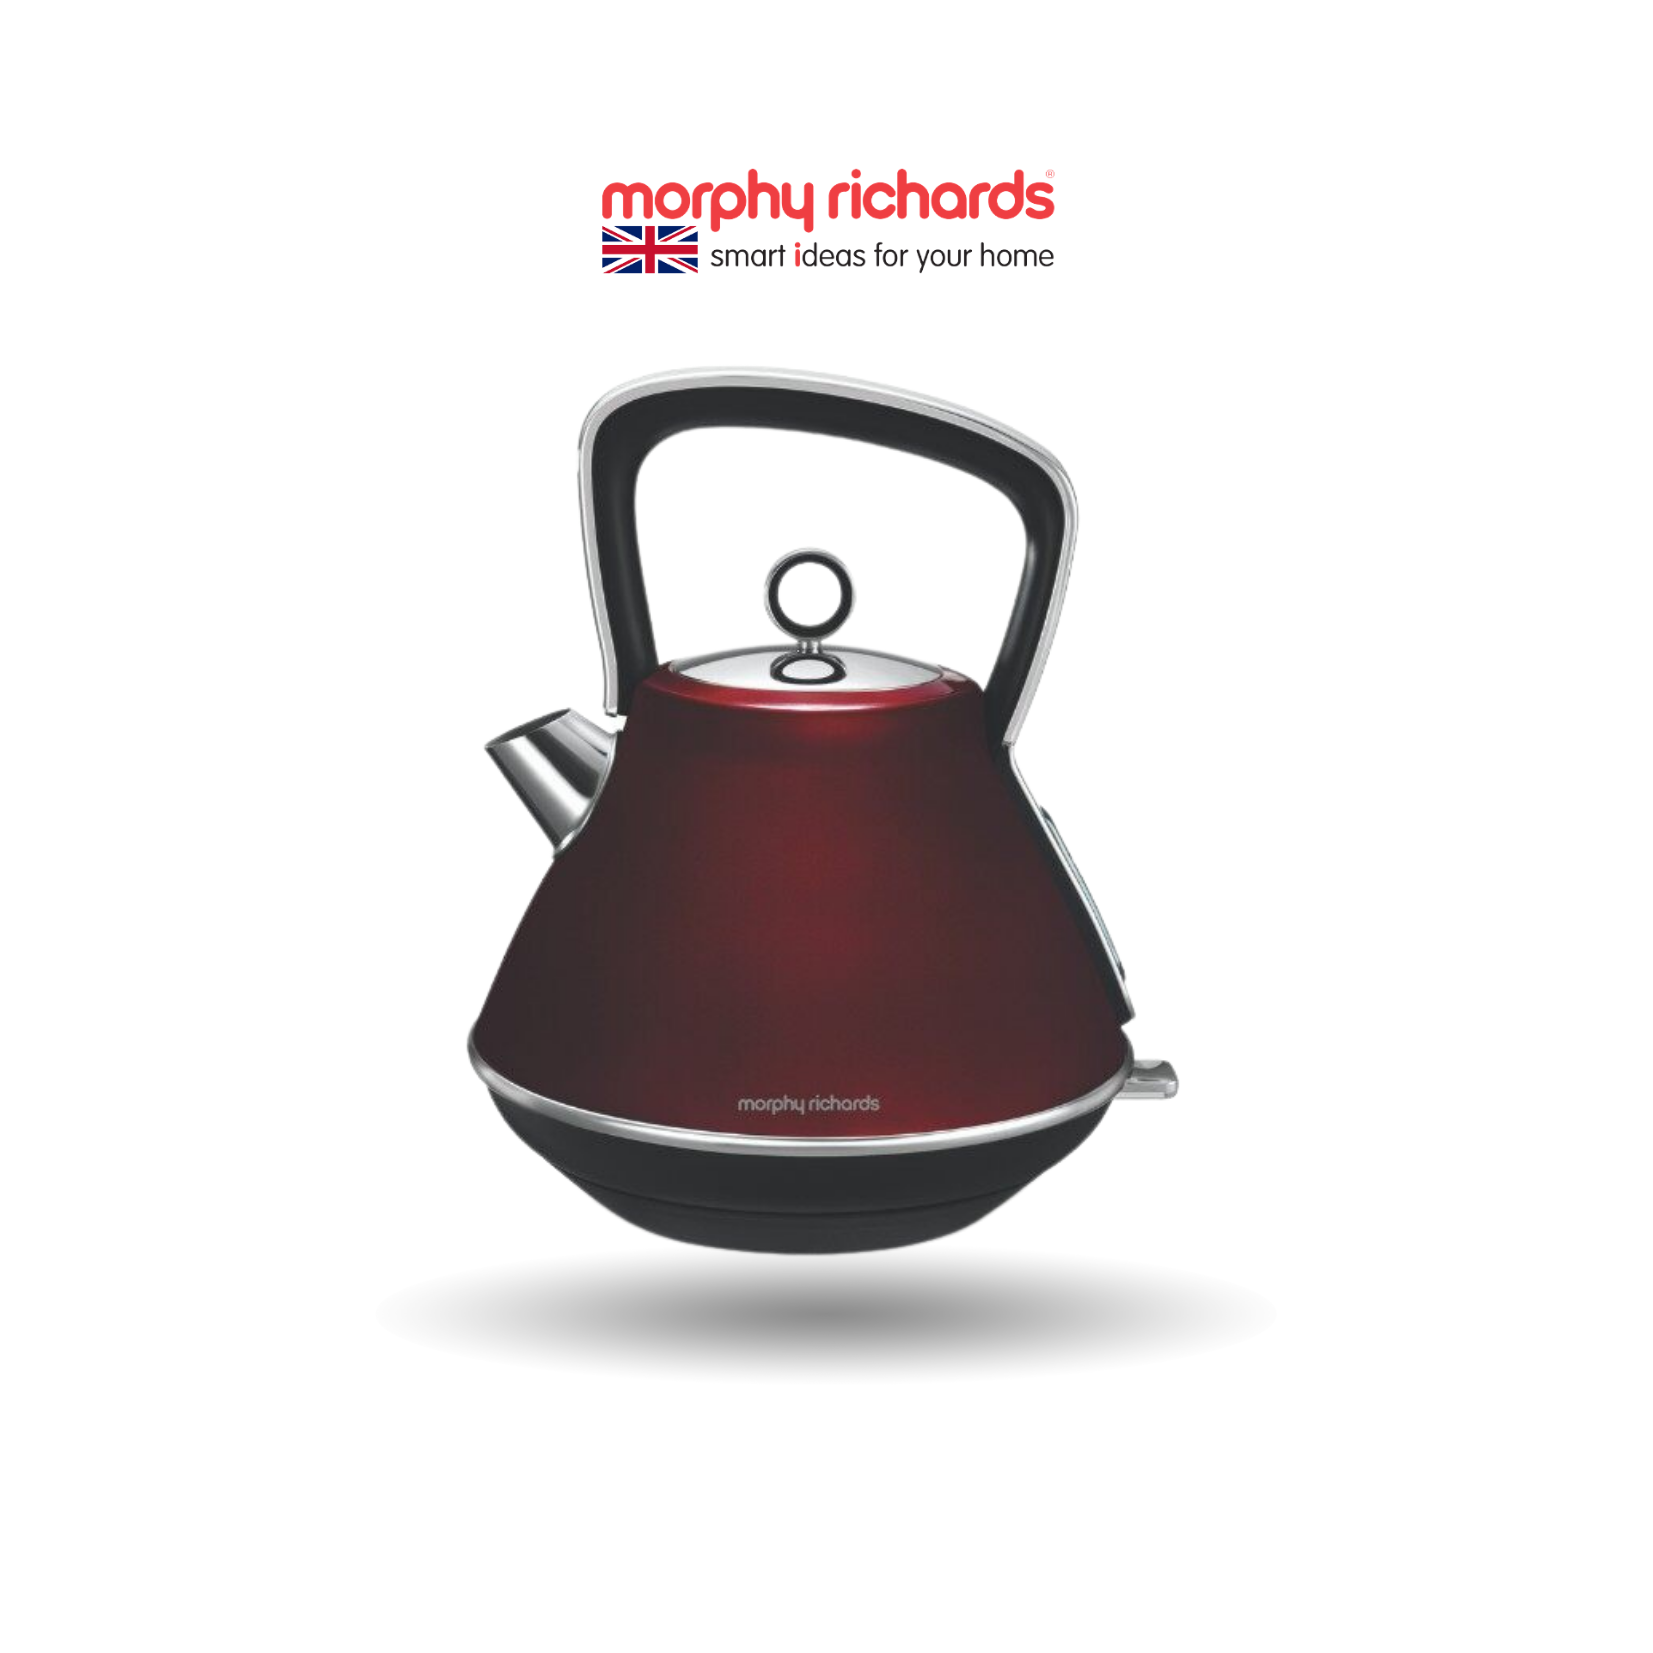 Morphy Richards Kettle Evoke Pyramid Red - 1.5L Capacity 2.2kw Power Water Level Indication